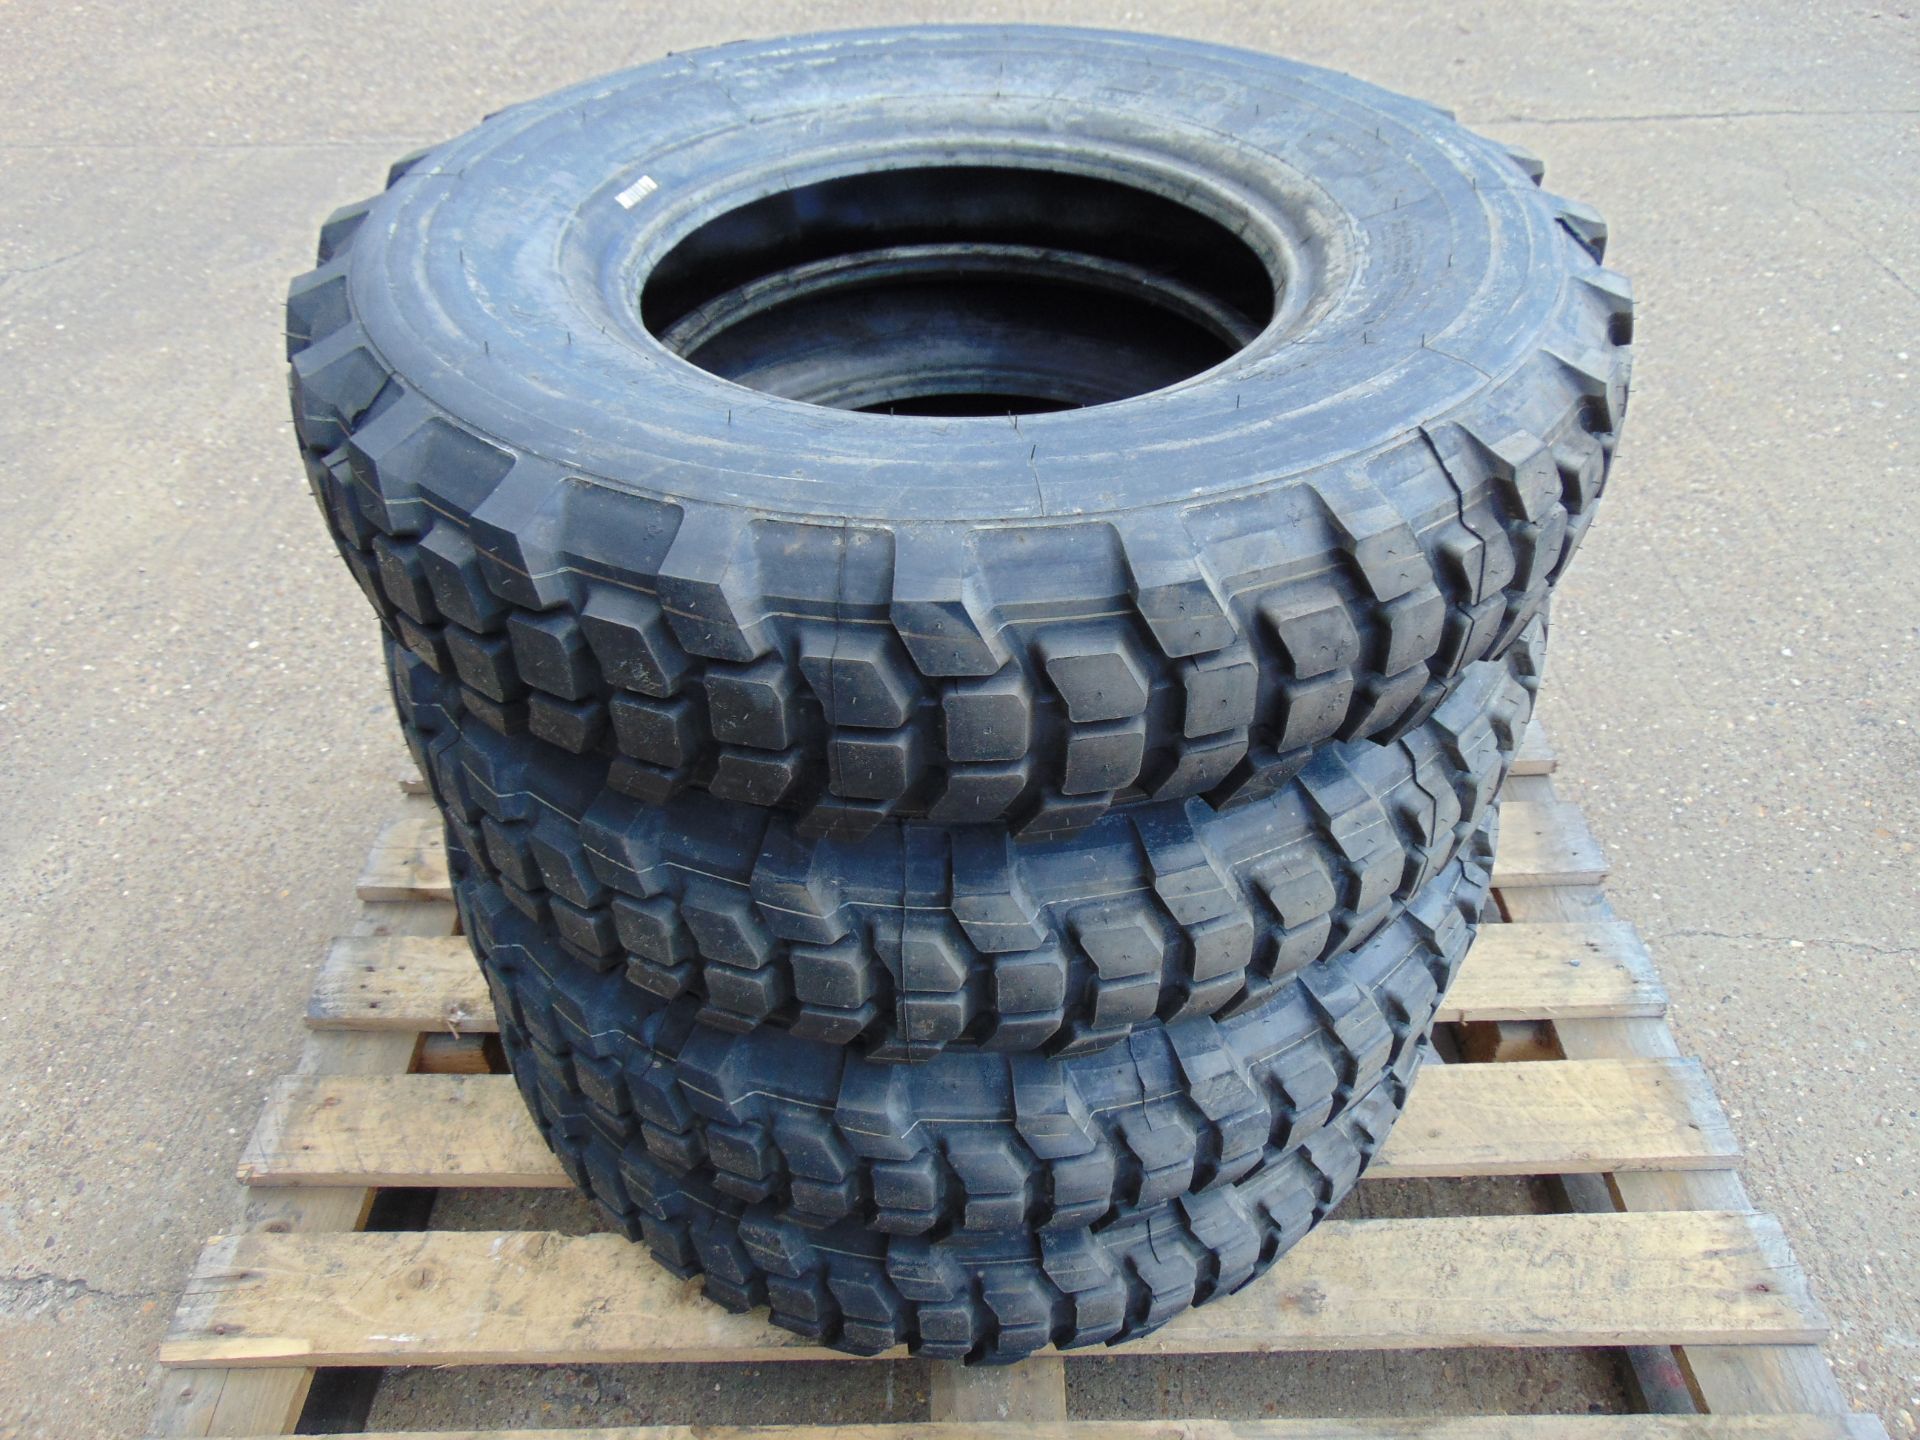 4 x Michelin XCL 7.50 R16 Tyres